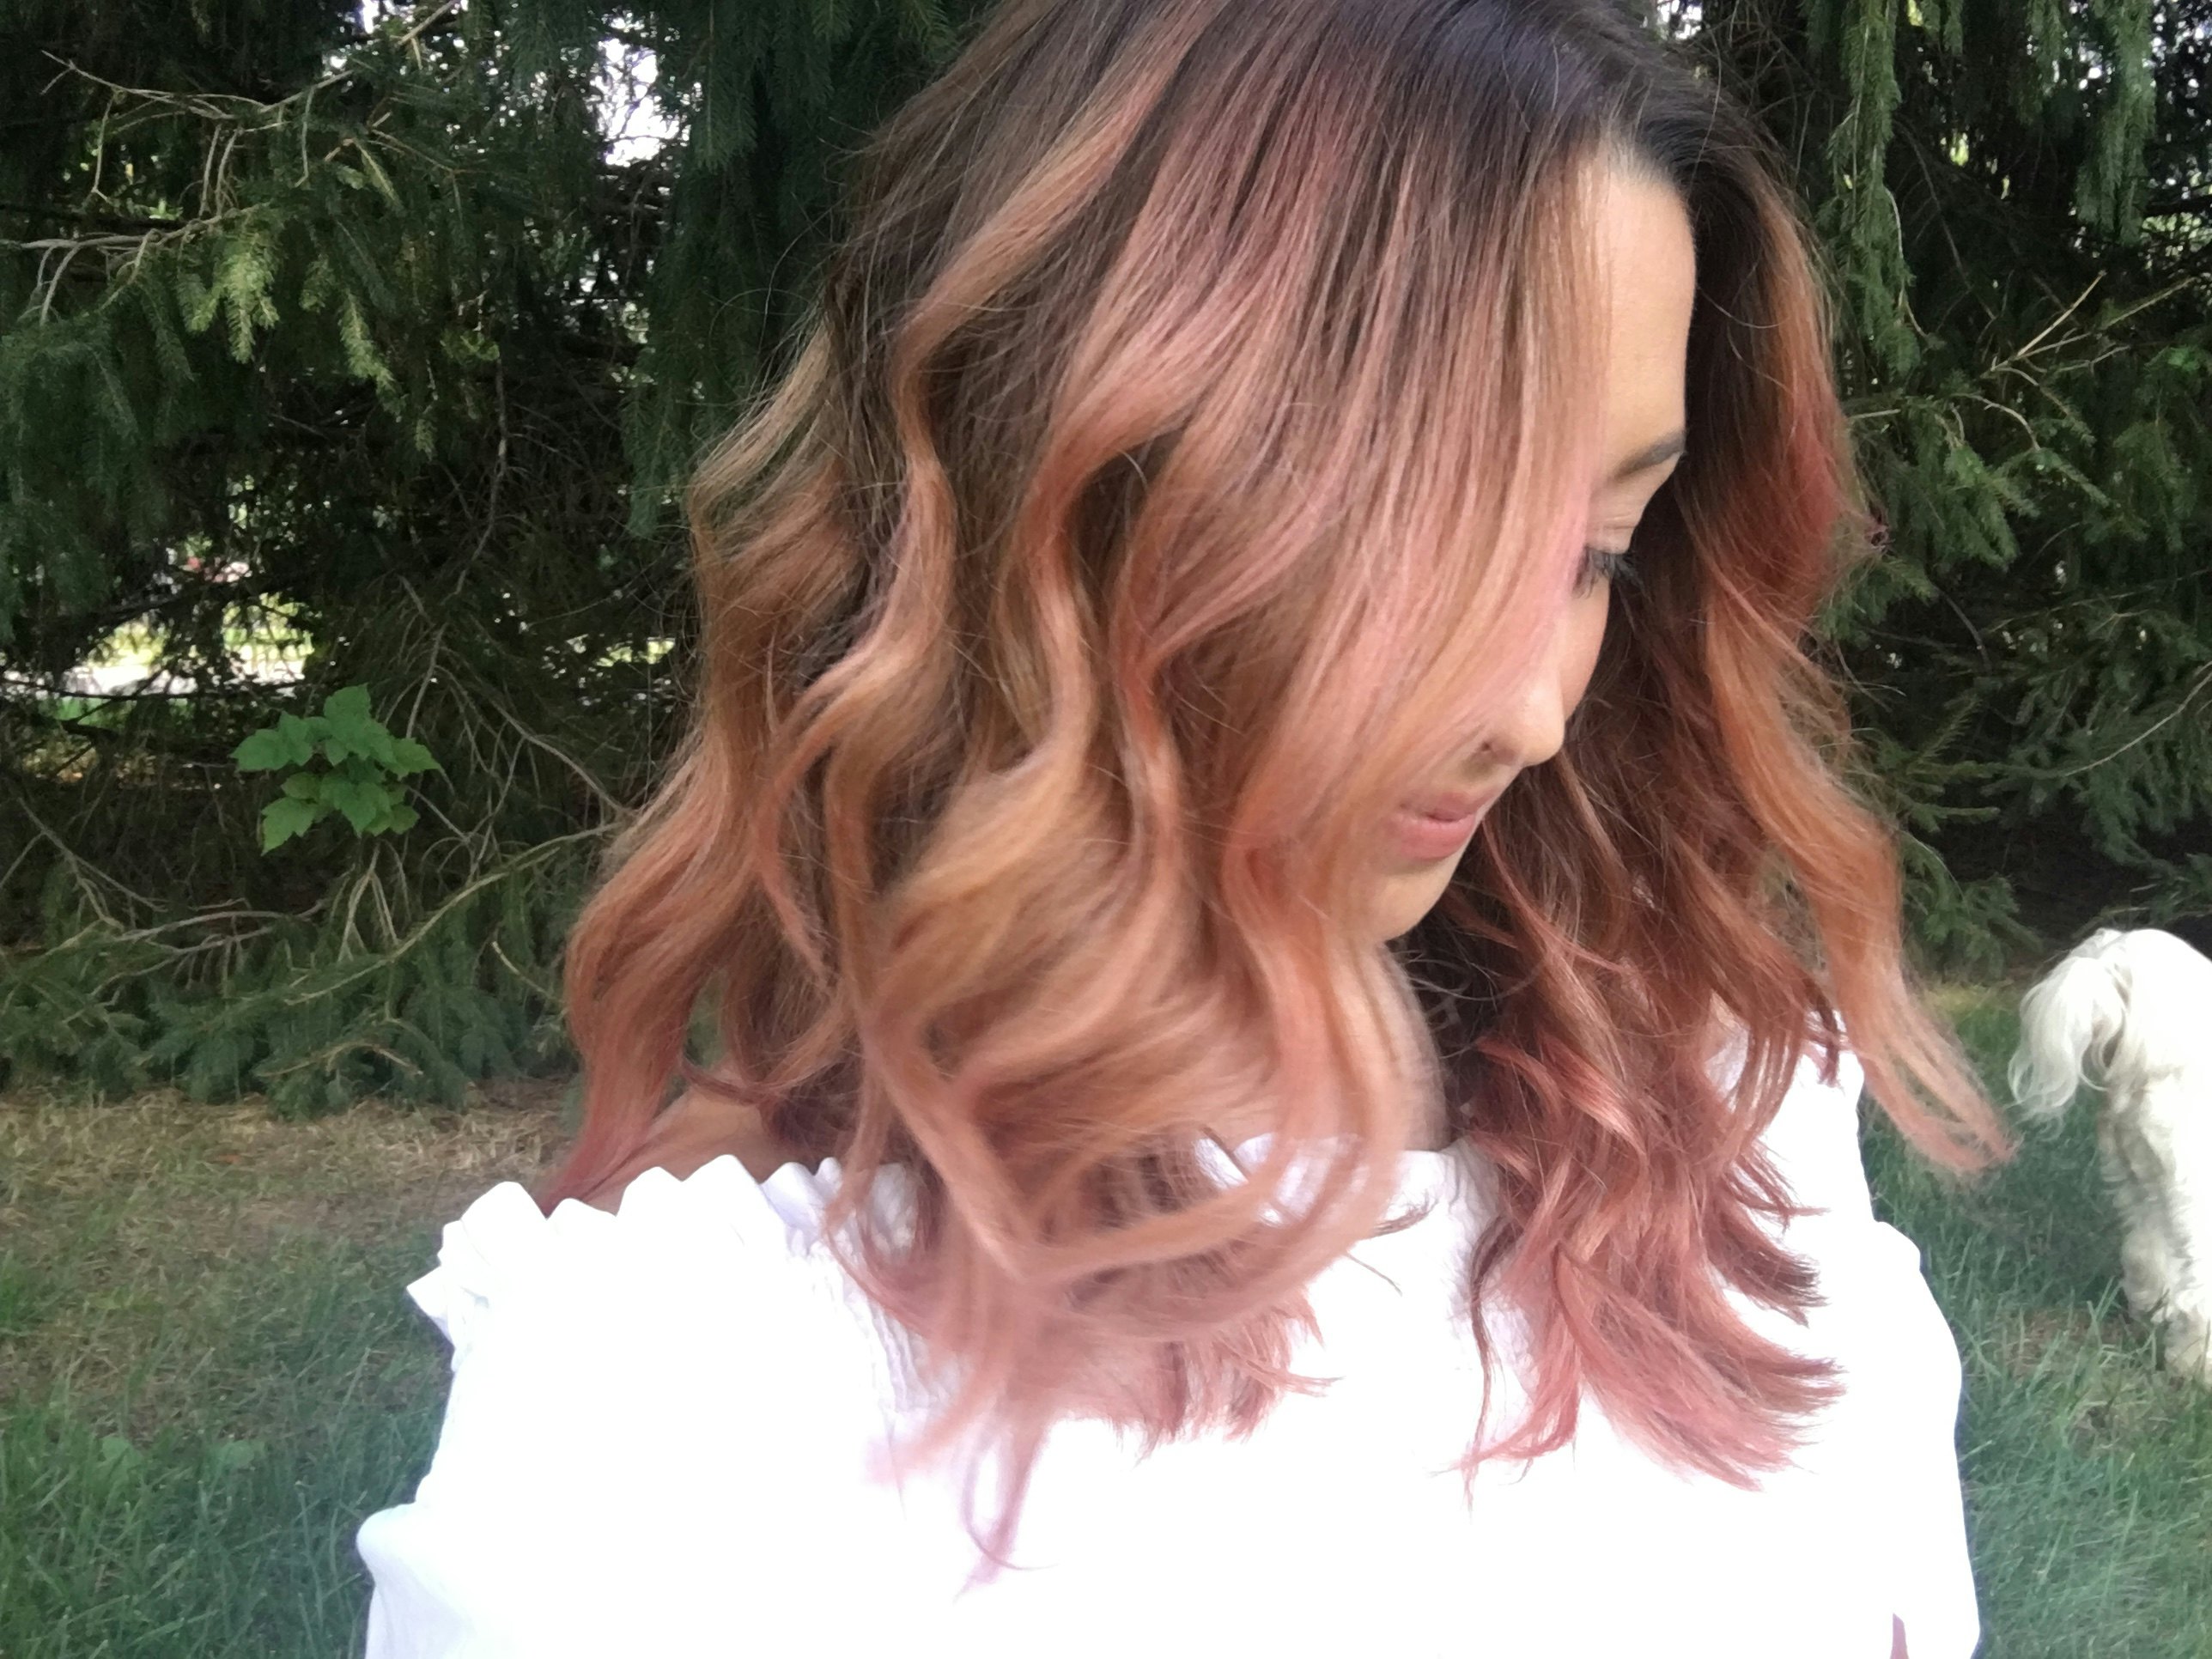 Dusty Rose Hair Is The New Instagram Hair Trend You Ll See